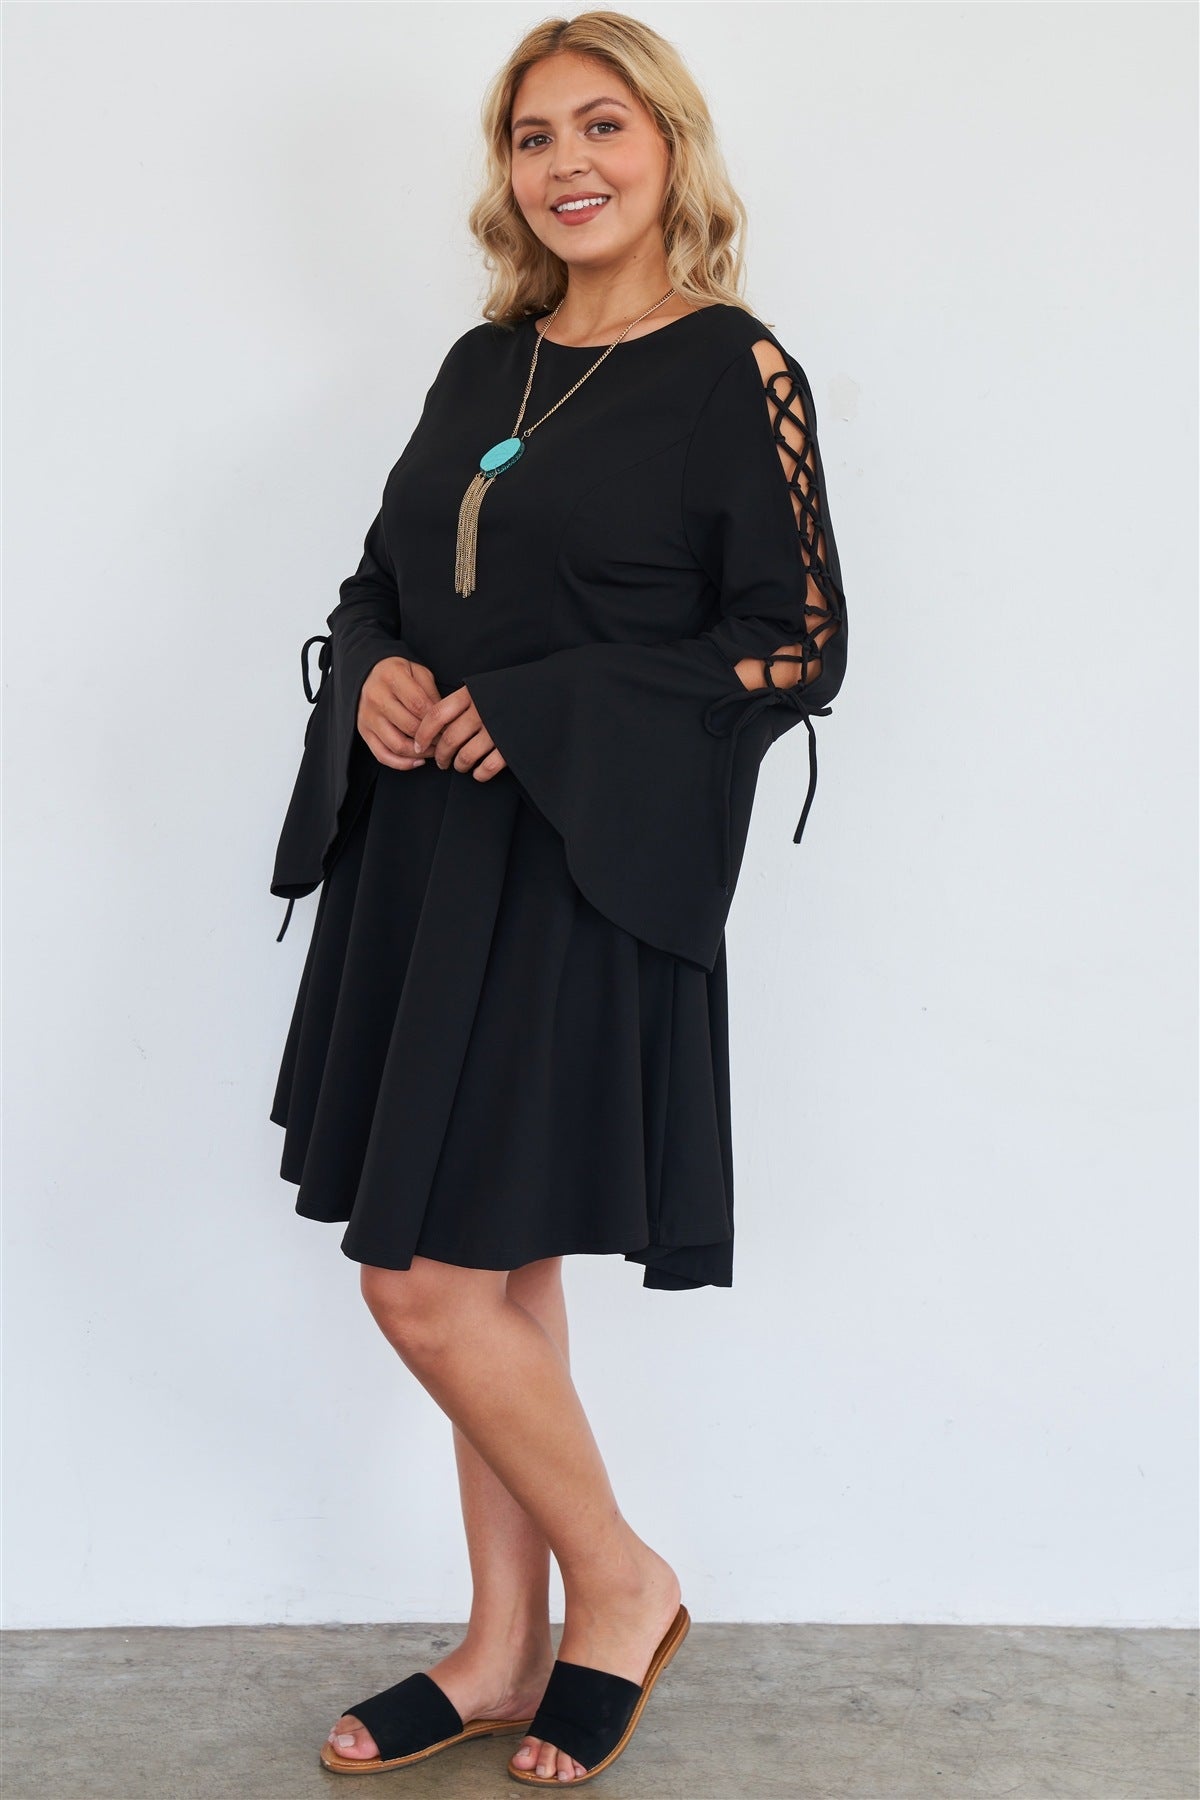 Plus Size Black Lace Up Detail Bell Sleeve Dress